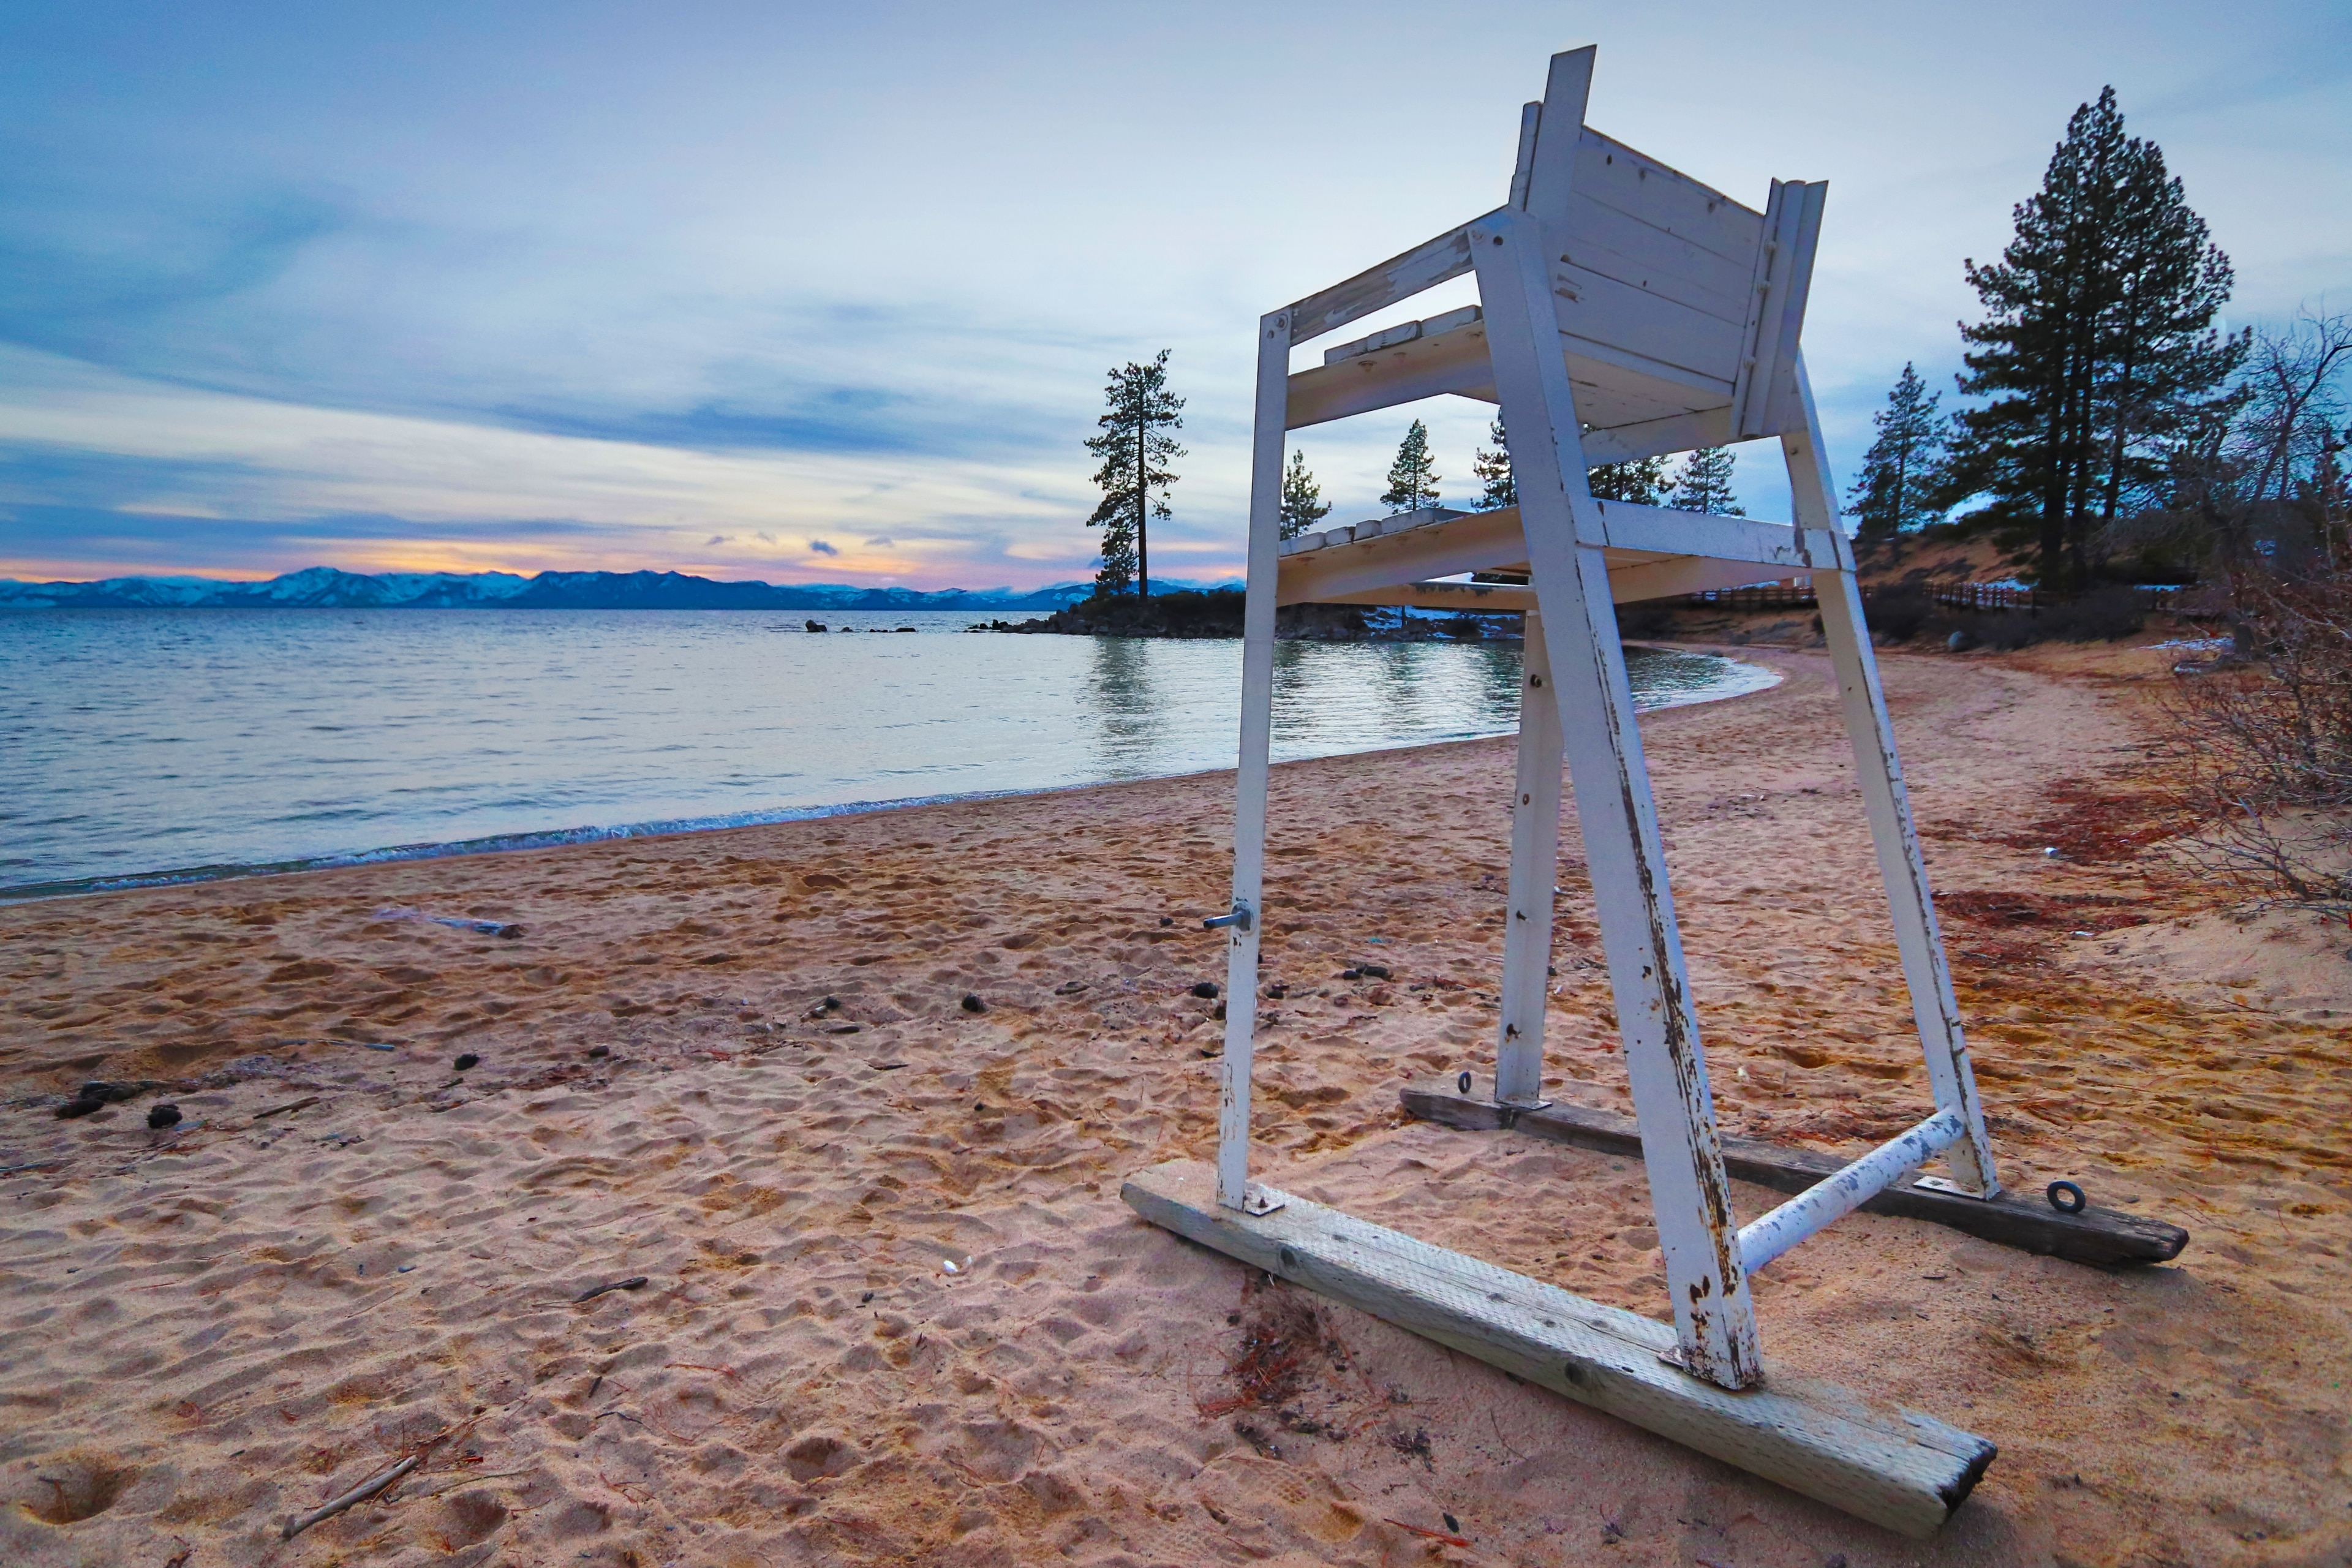 Cold January day at a very popular summer spot on Lake Tahoe.  The late hour combined with the snow and unusual solitude of the location made for a great shoot.